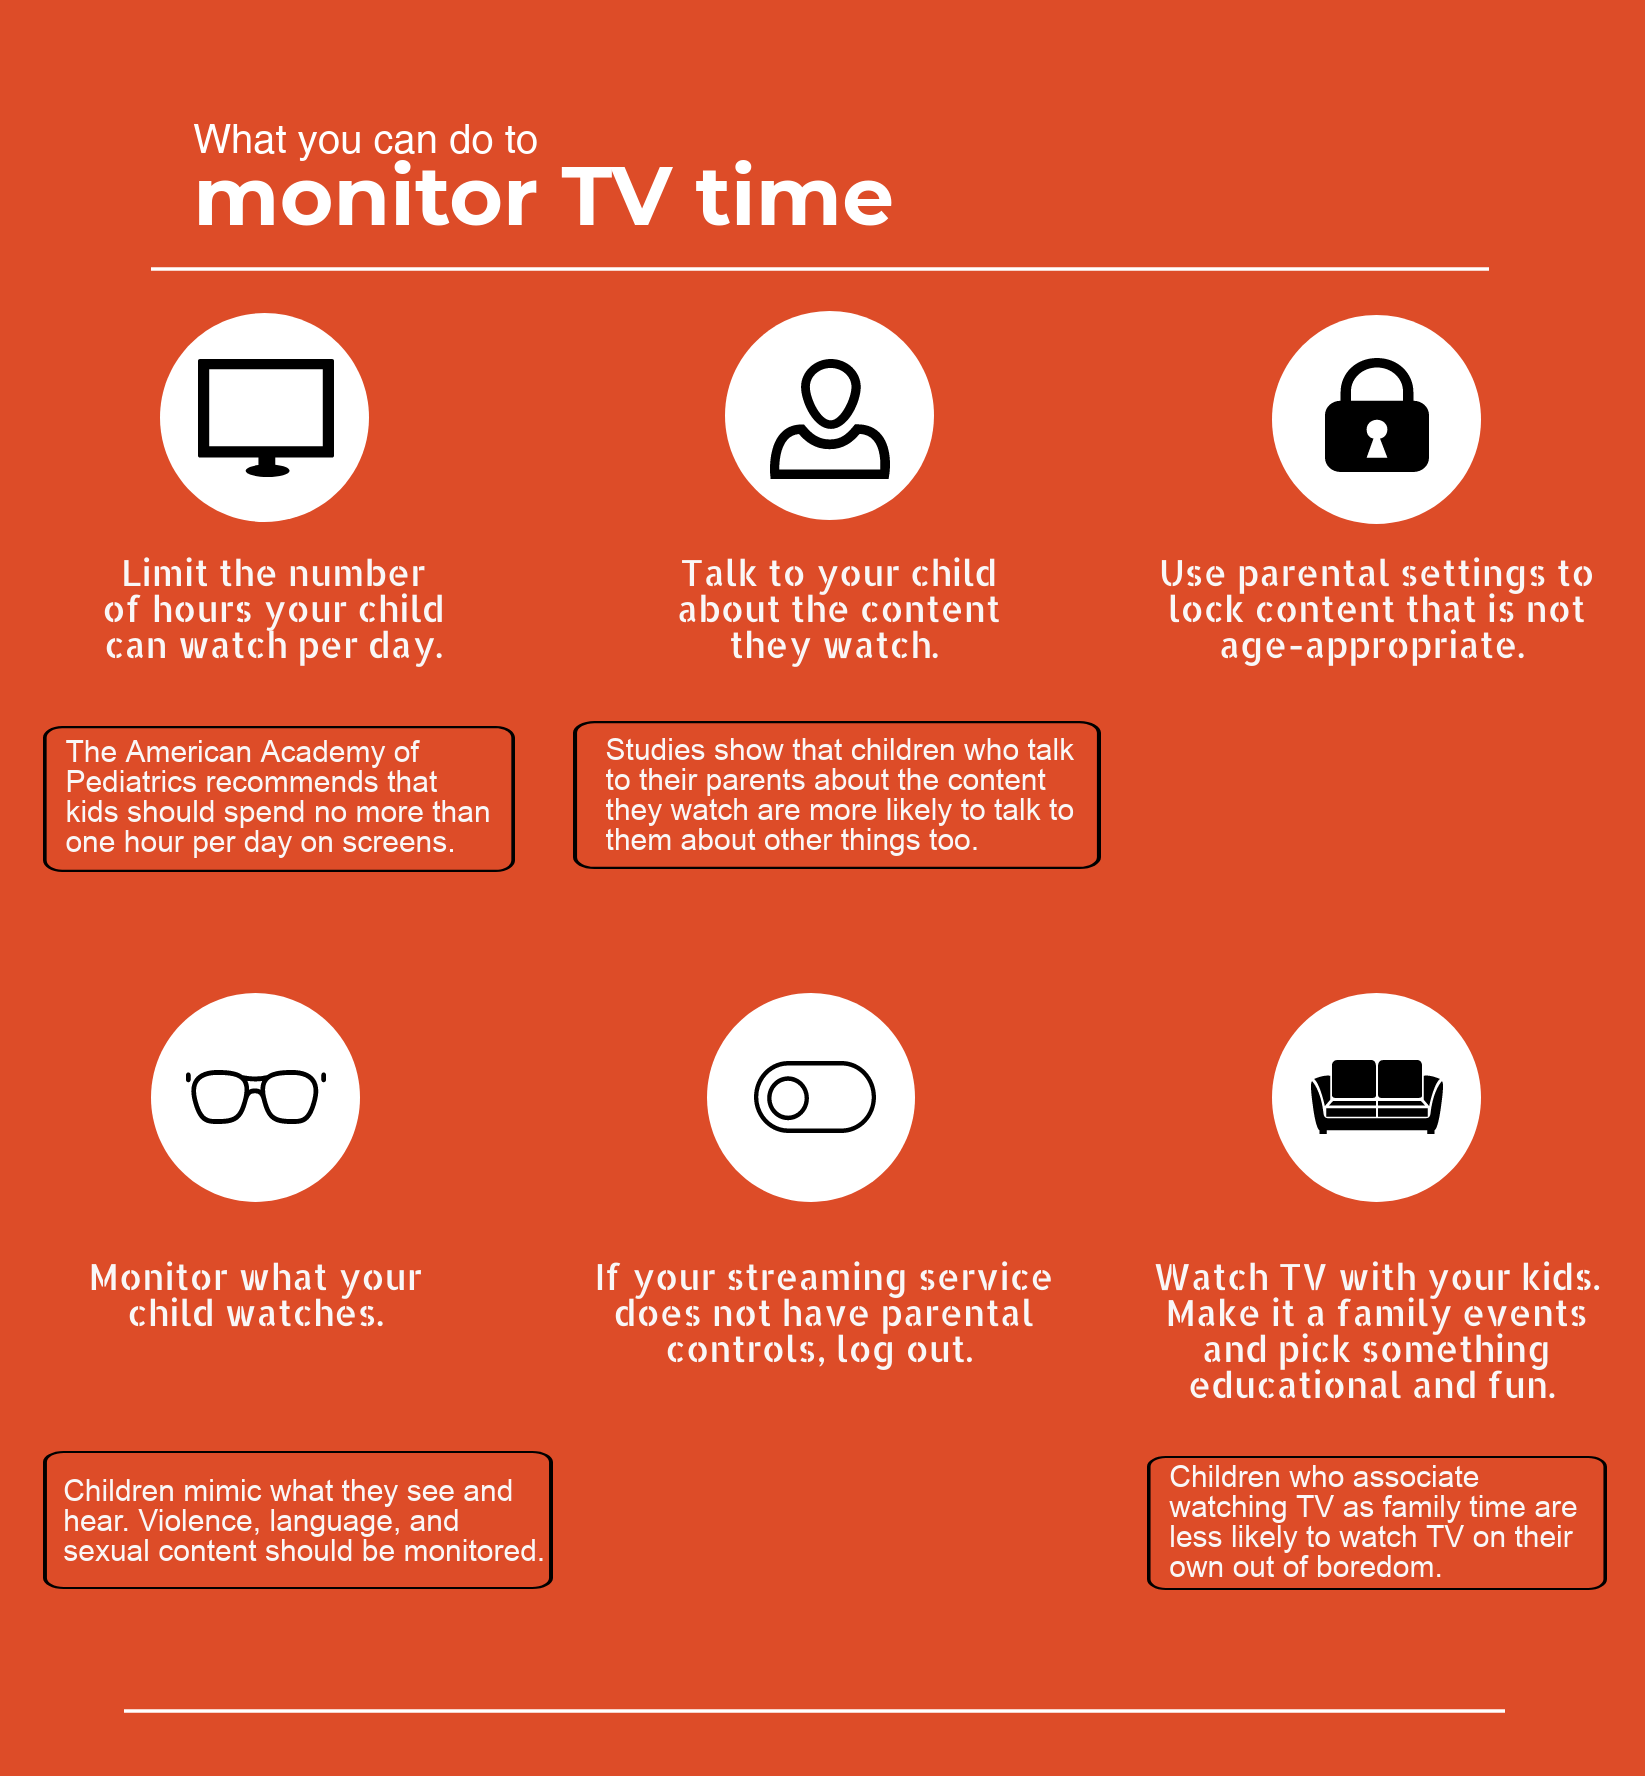 Monitor TV time infographic